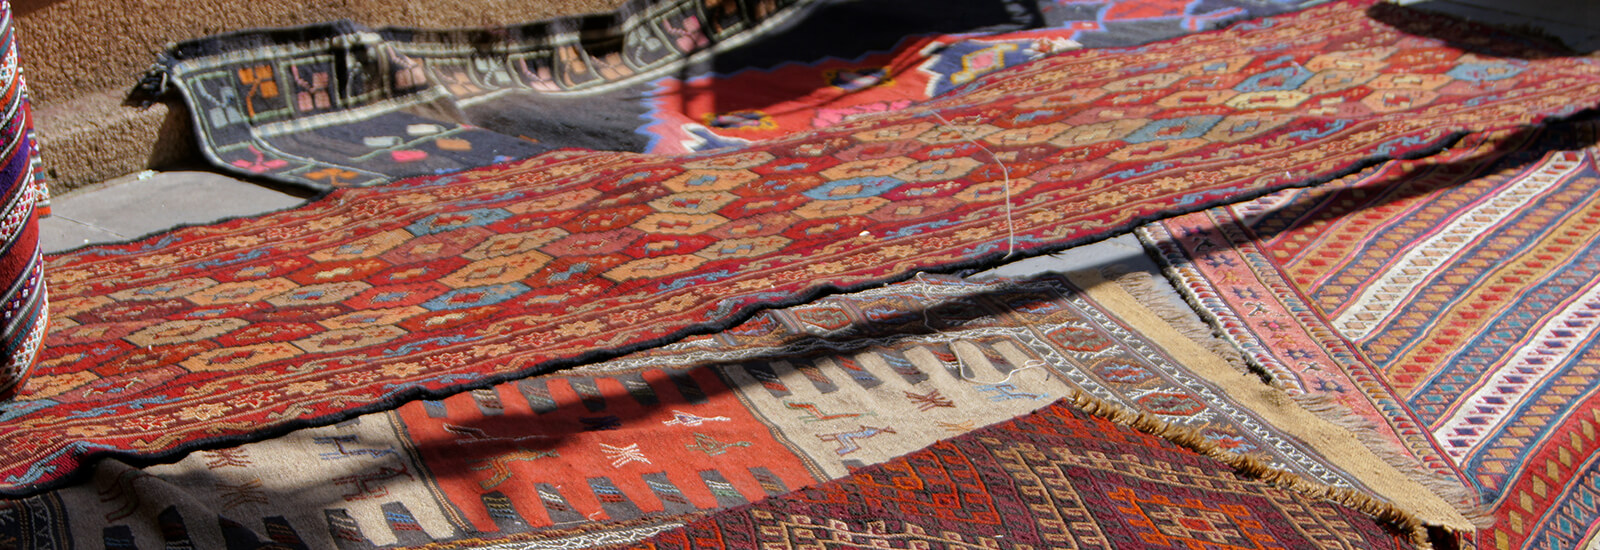 Differences Between Old Carpets and Rugs